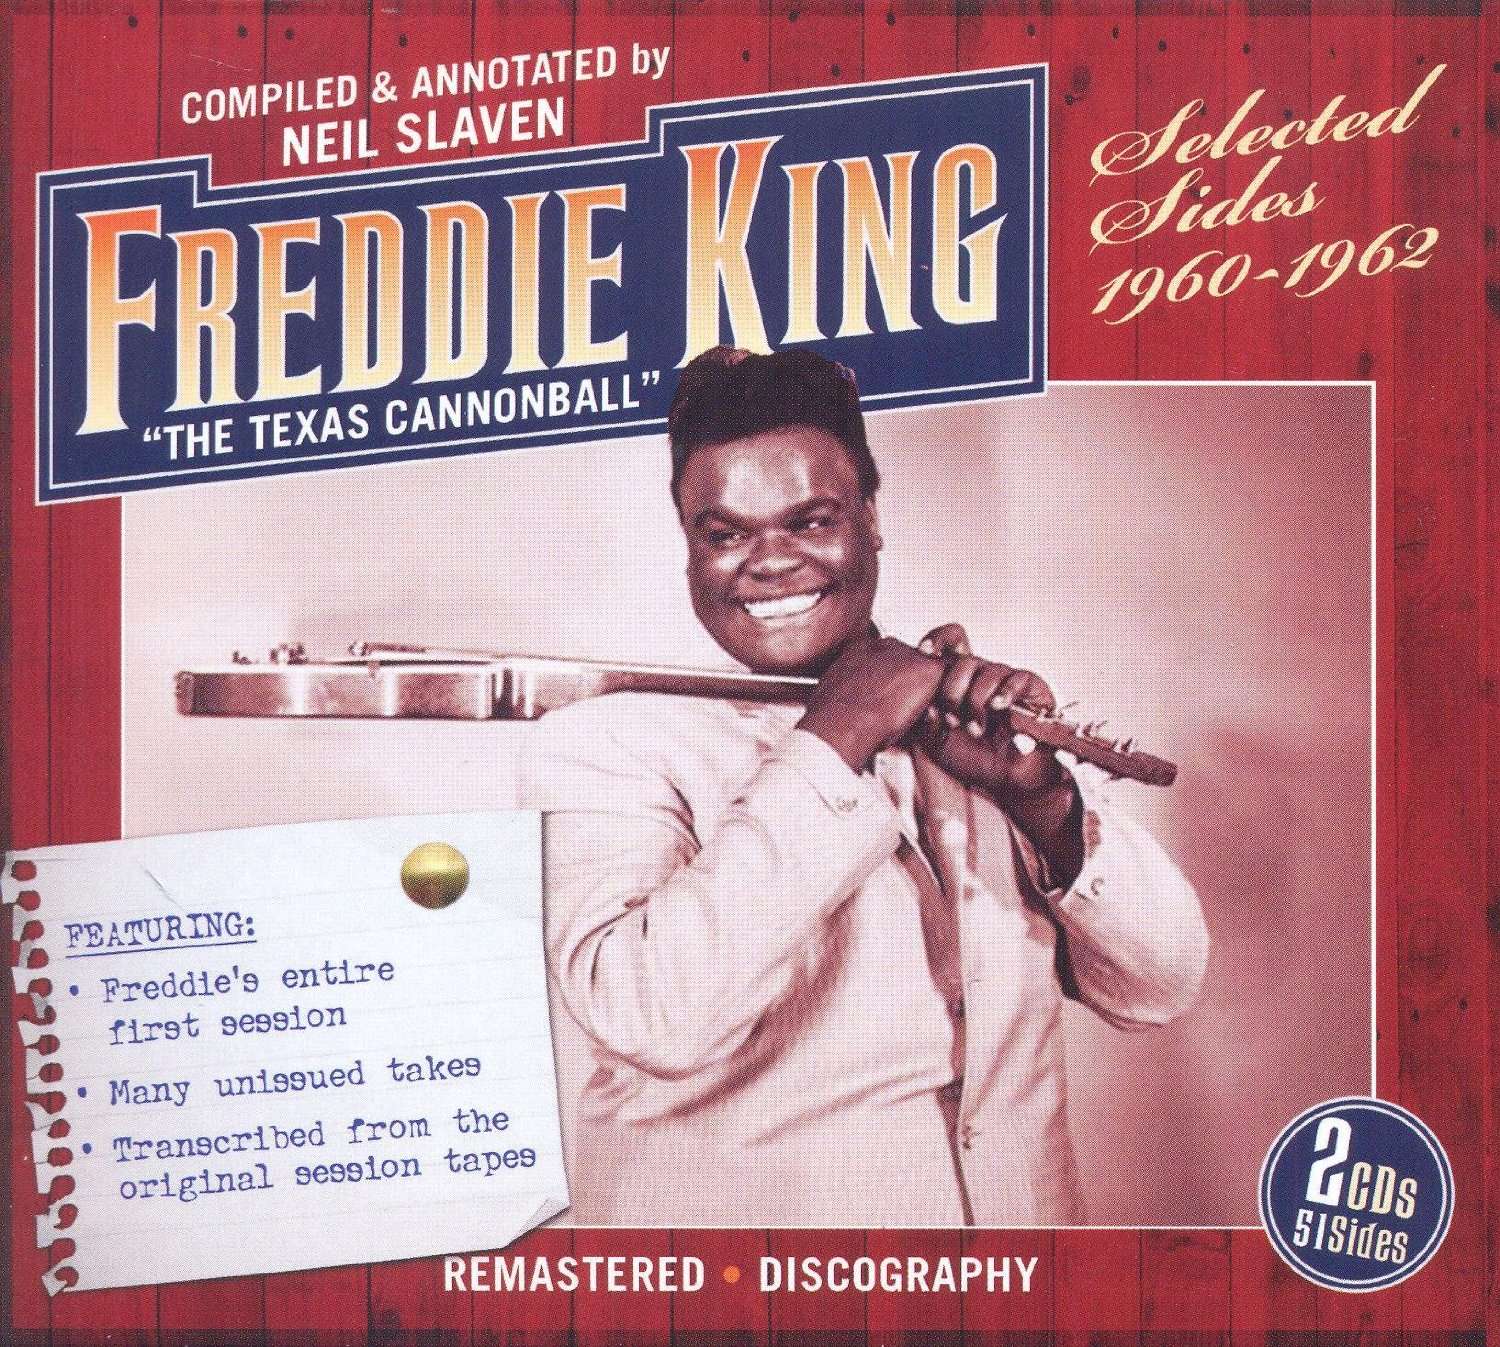 Freddie King – “Selected Sides 1960-1962” cover album